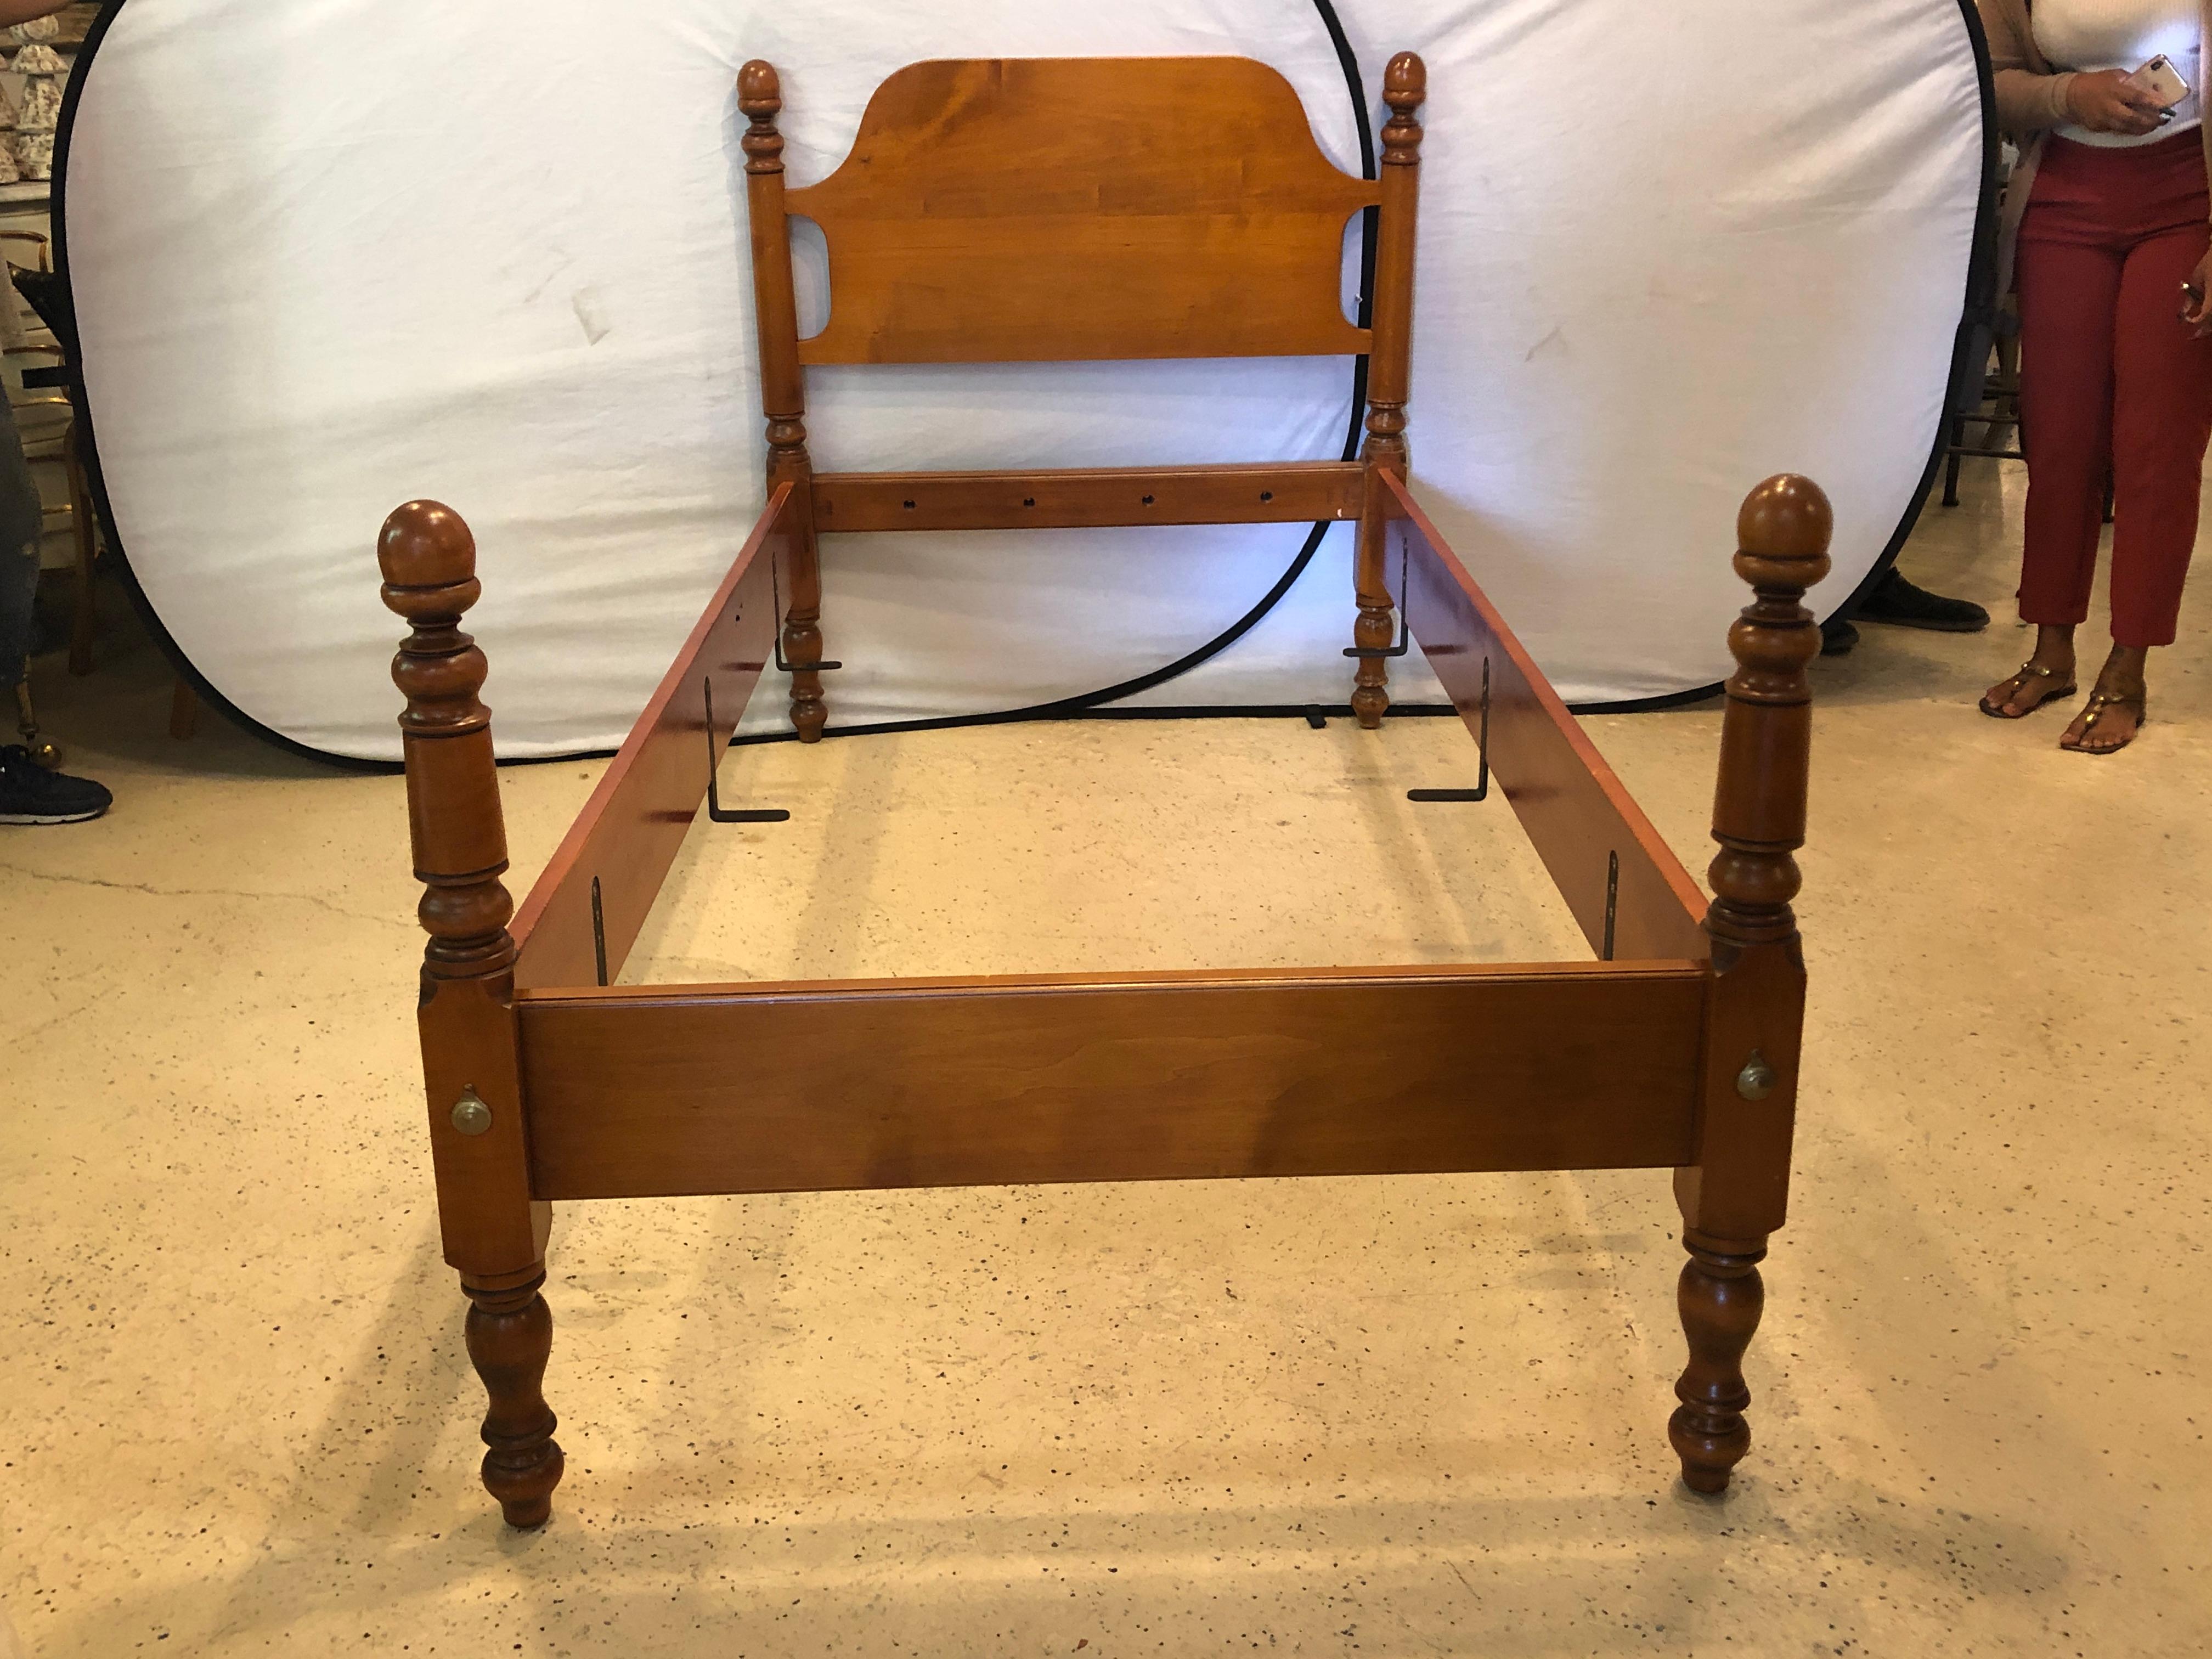 Two sets of four ball top poster twin beds by Leonards Sackonk, MA. Each having all hardware and side rails. Can purchase one or all four beds. Complete with all mounting and tools. Price is for one pair of beds. Can purchase one bed or all